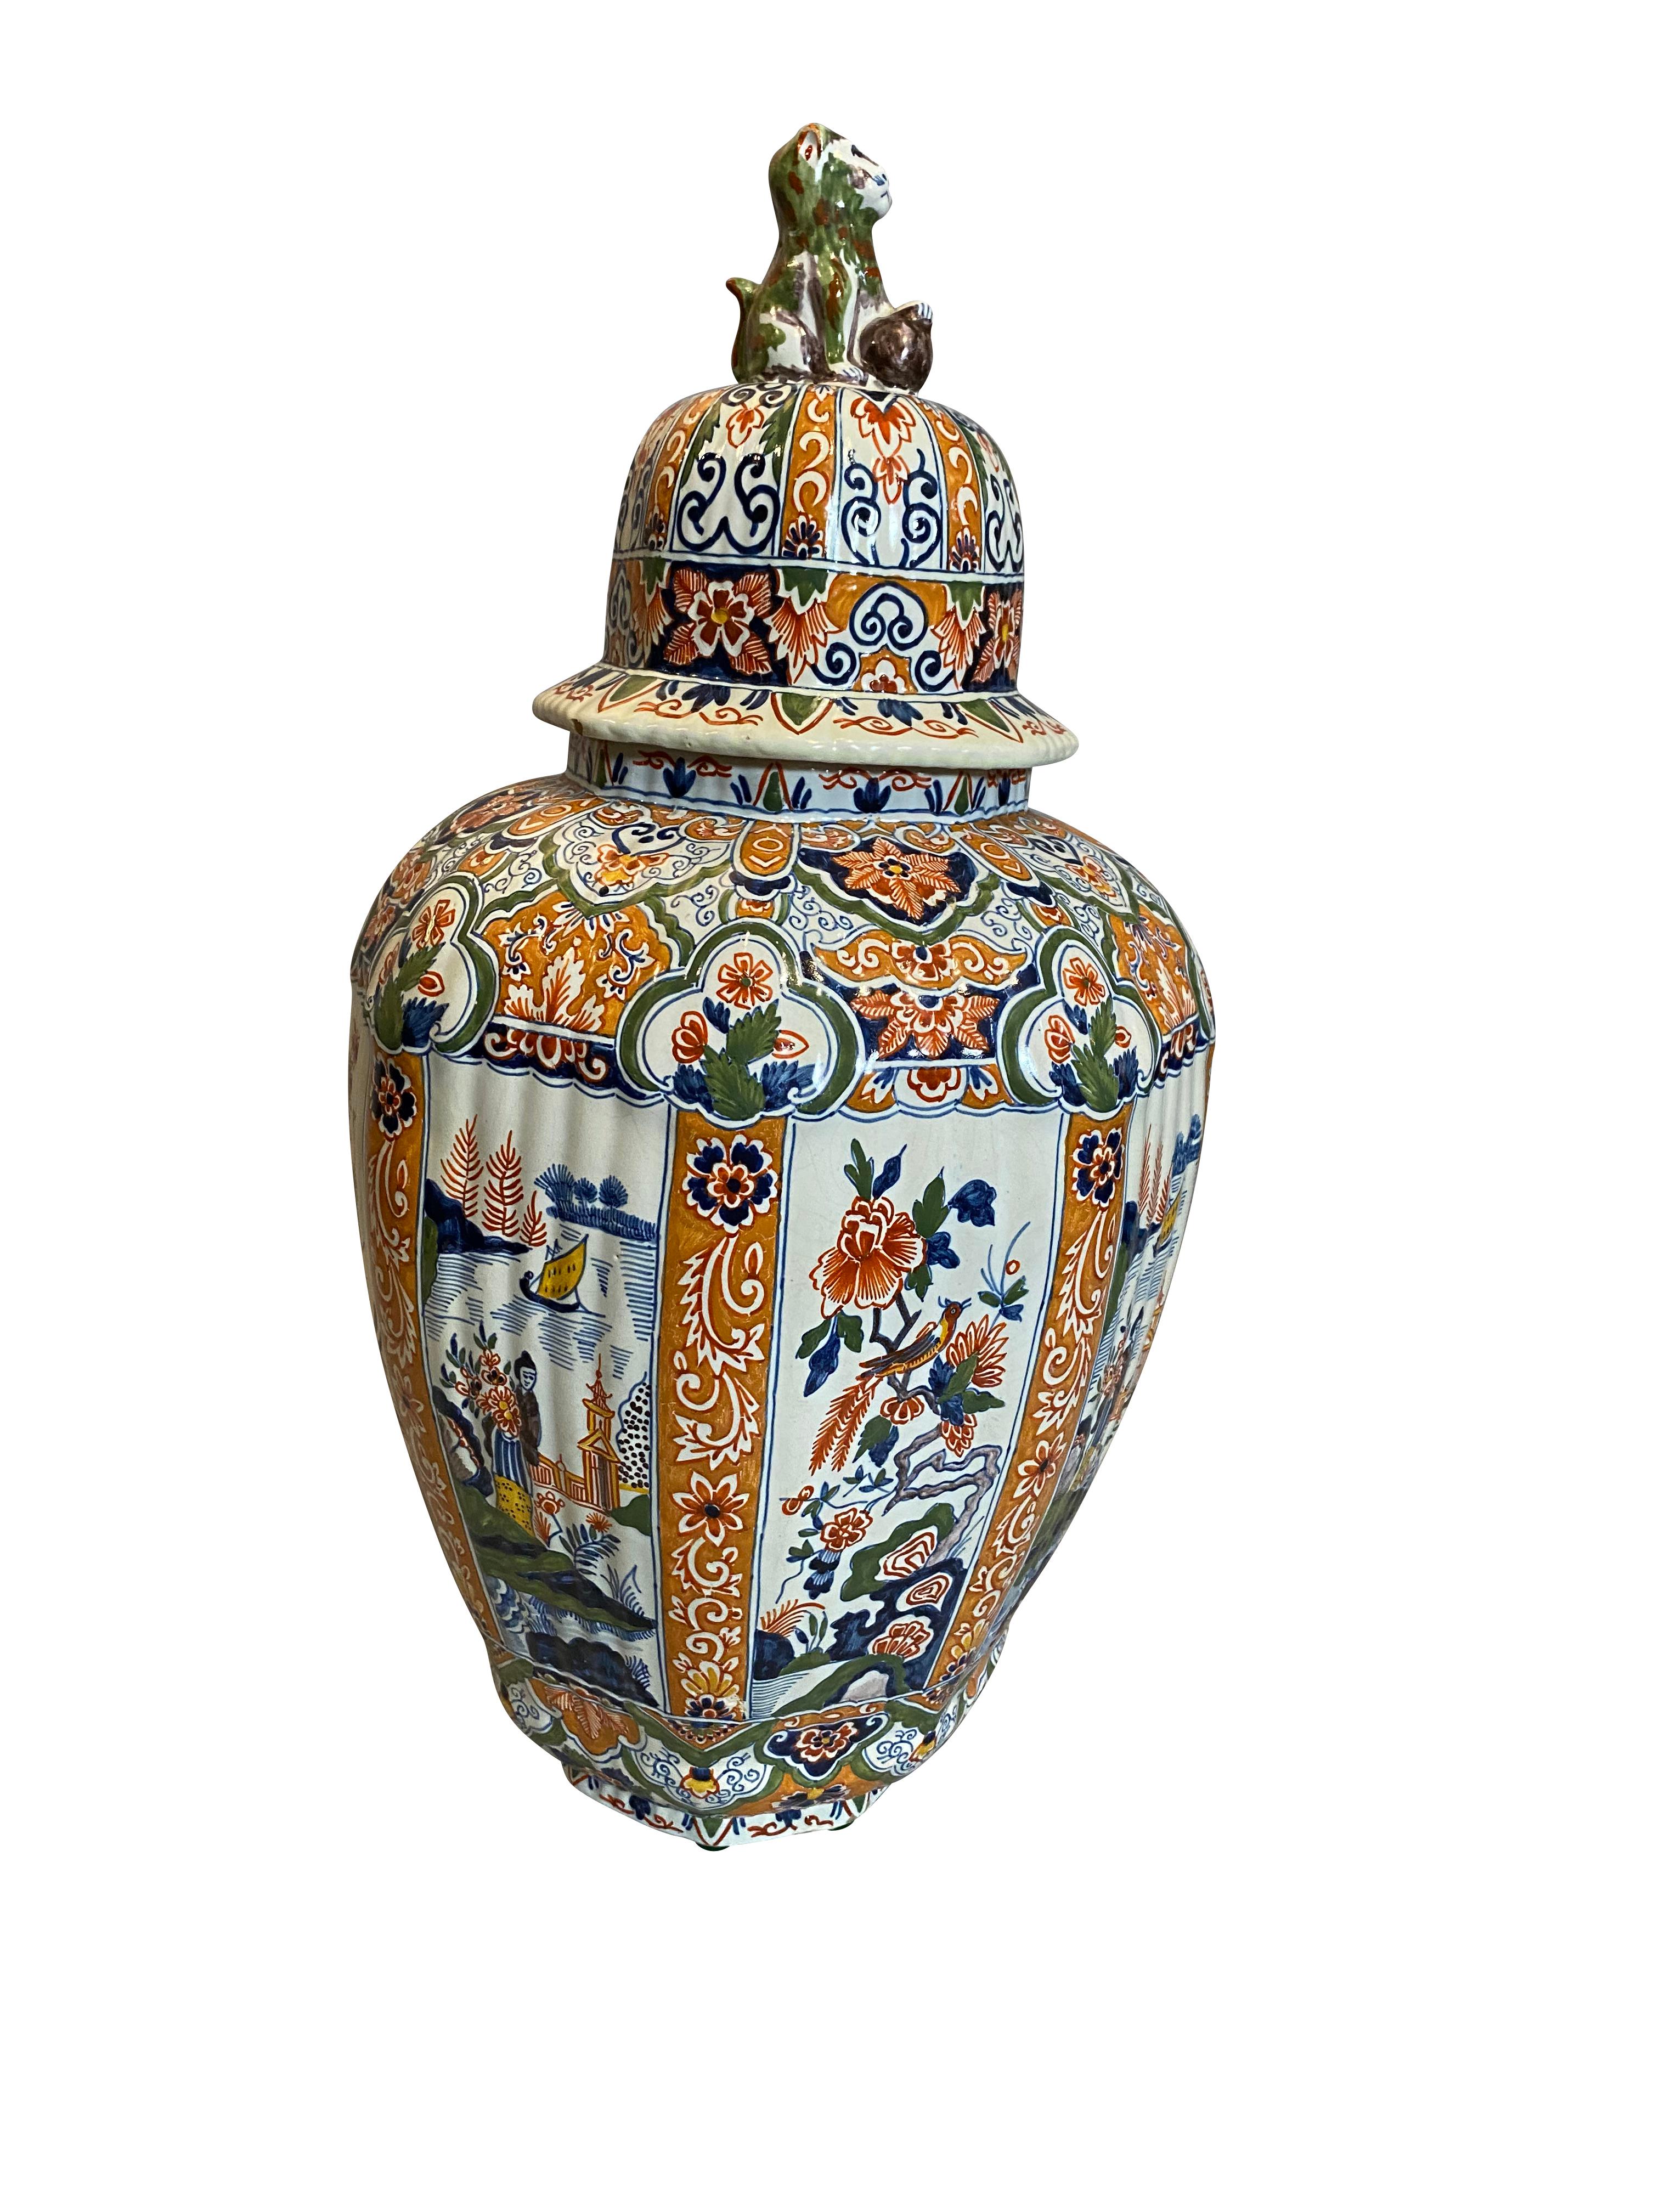 With lion form finial on the domed ribbed cover, baluster form vase with polychrome decoration.